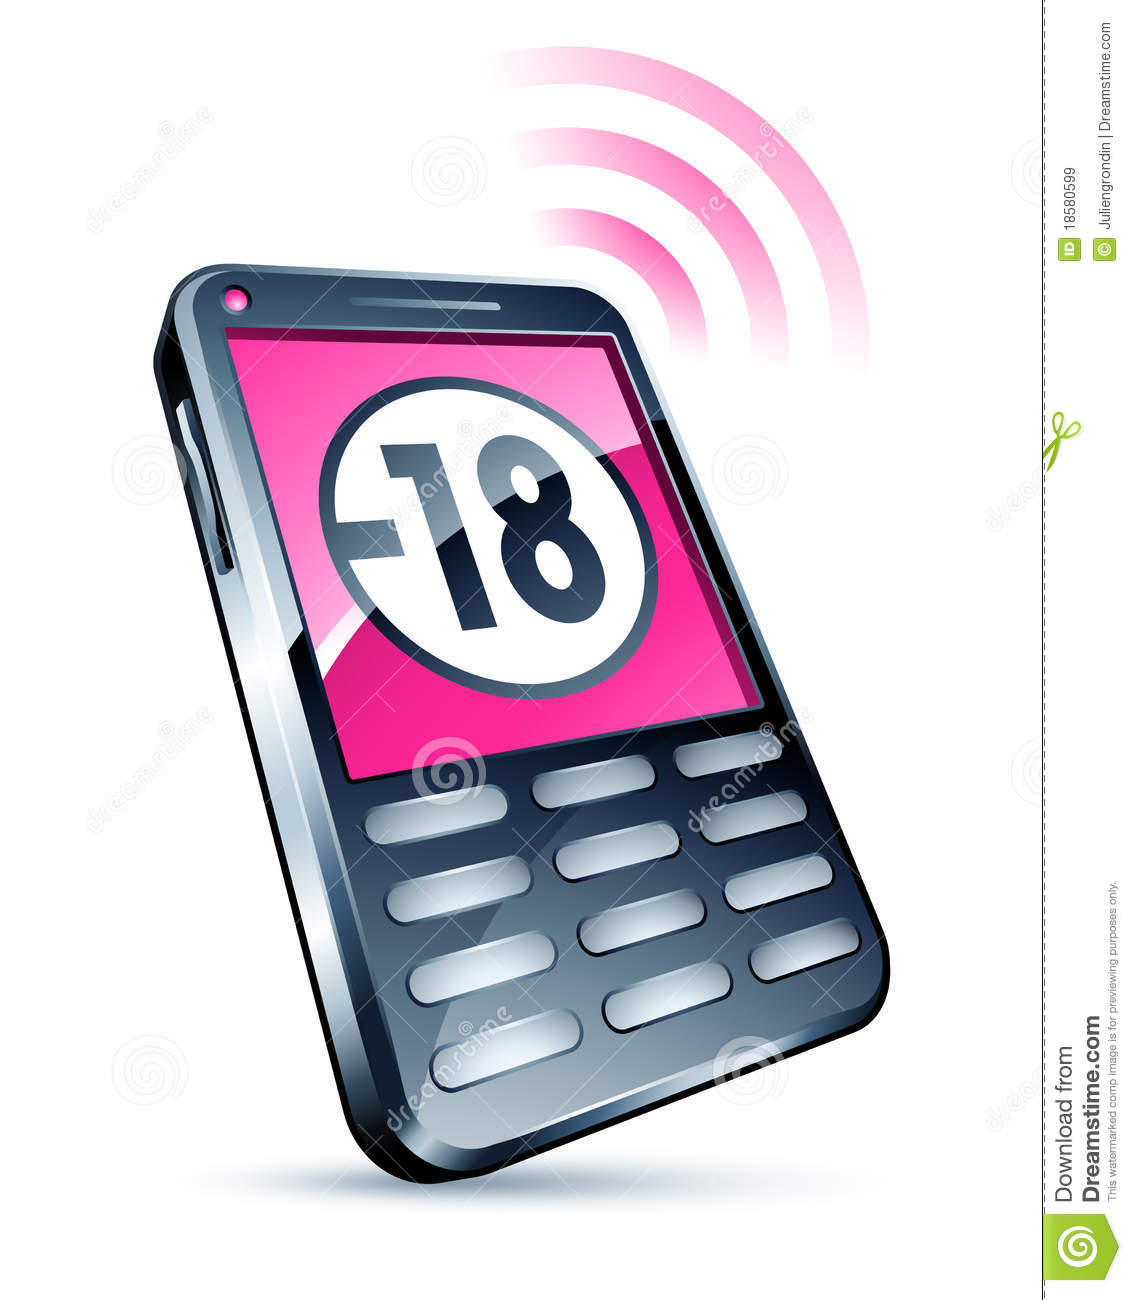 Pink Cell Phone Royalty Free Stock Images   Image  18580599